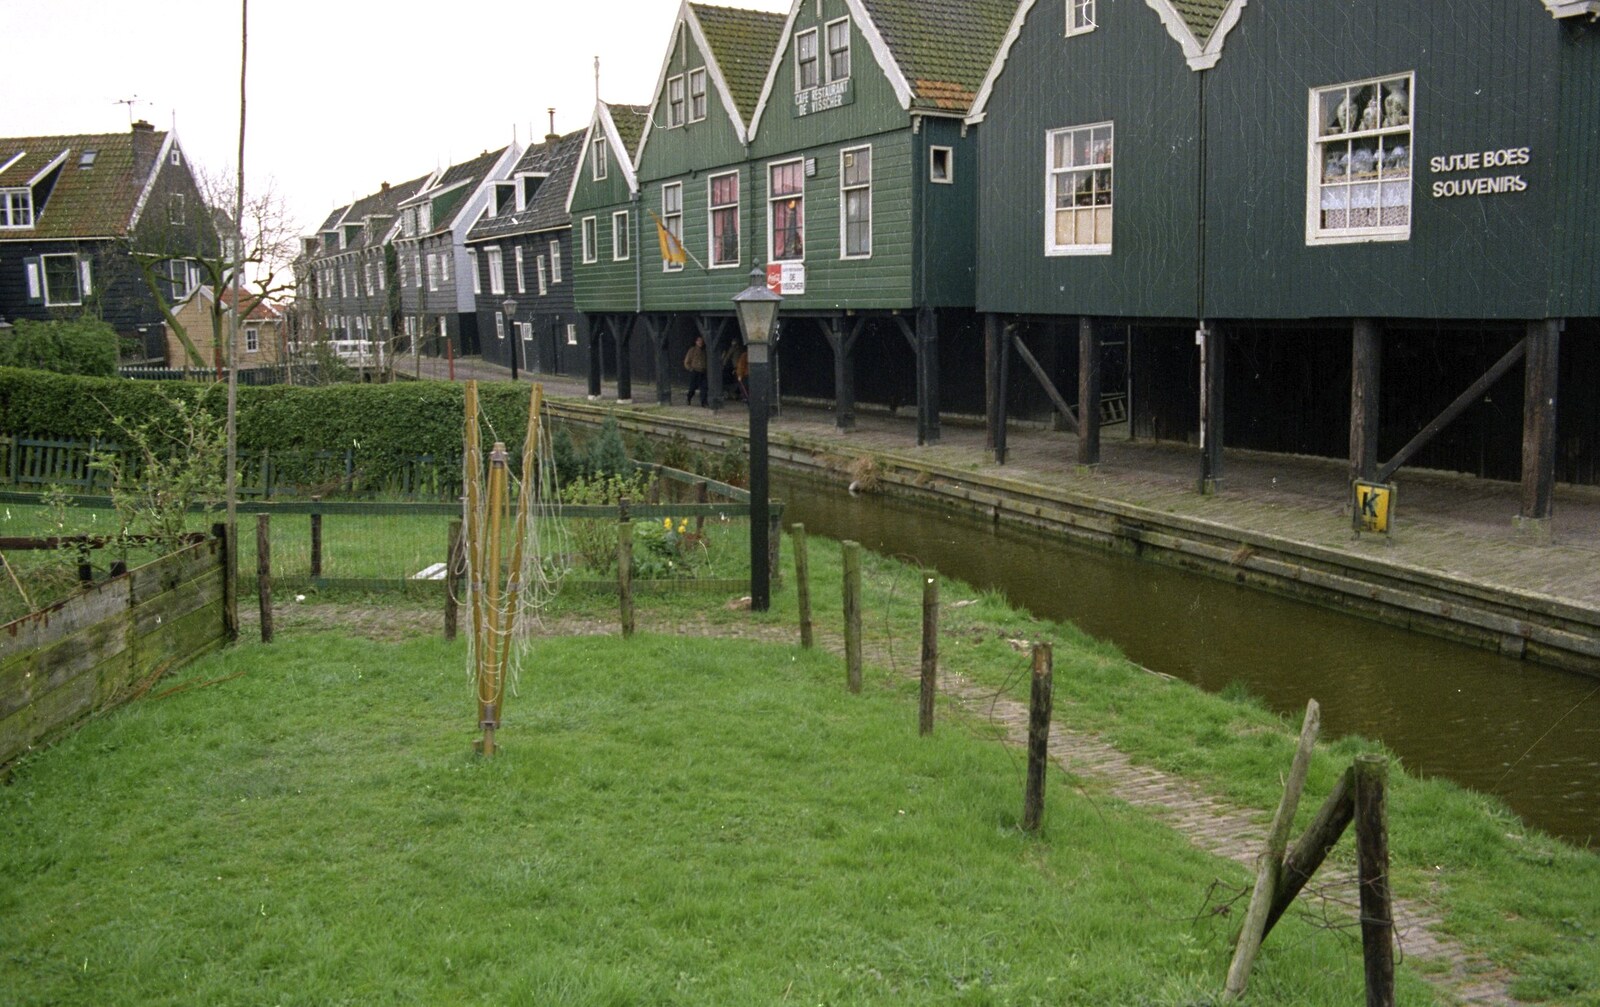 Out and About in Amsterdam, Hoorne, Vollendam and Edam, The Netherlands - 26th March 1992: Huts on stilts